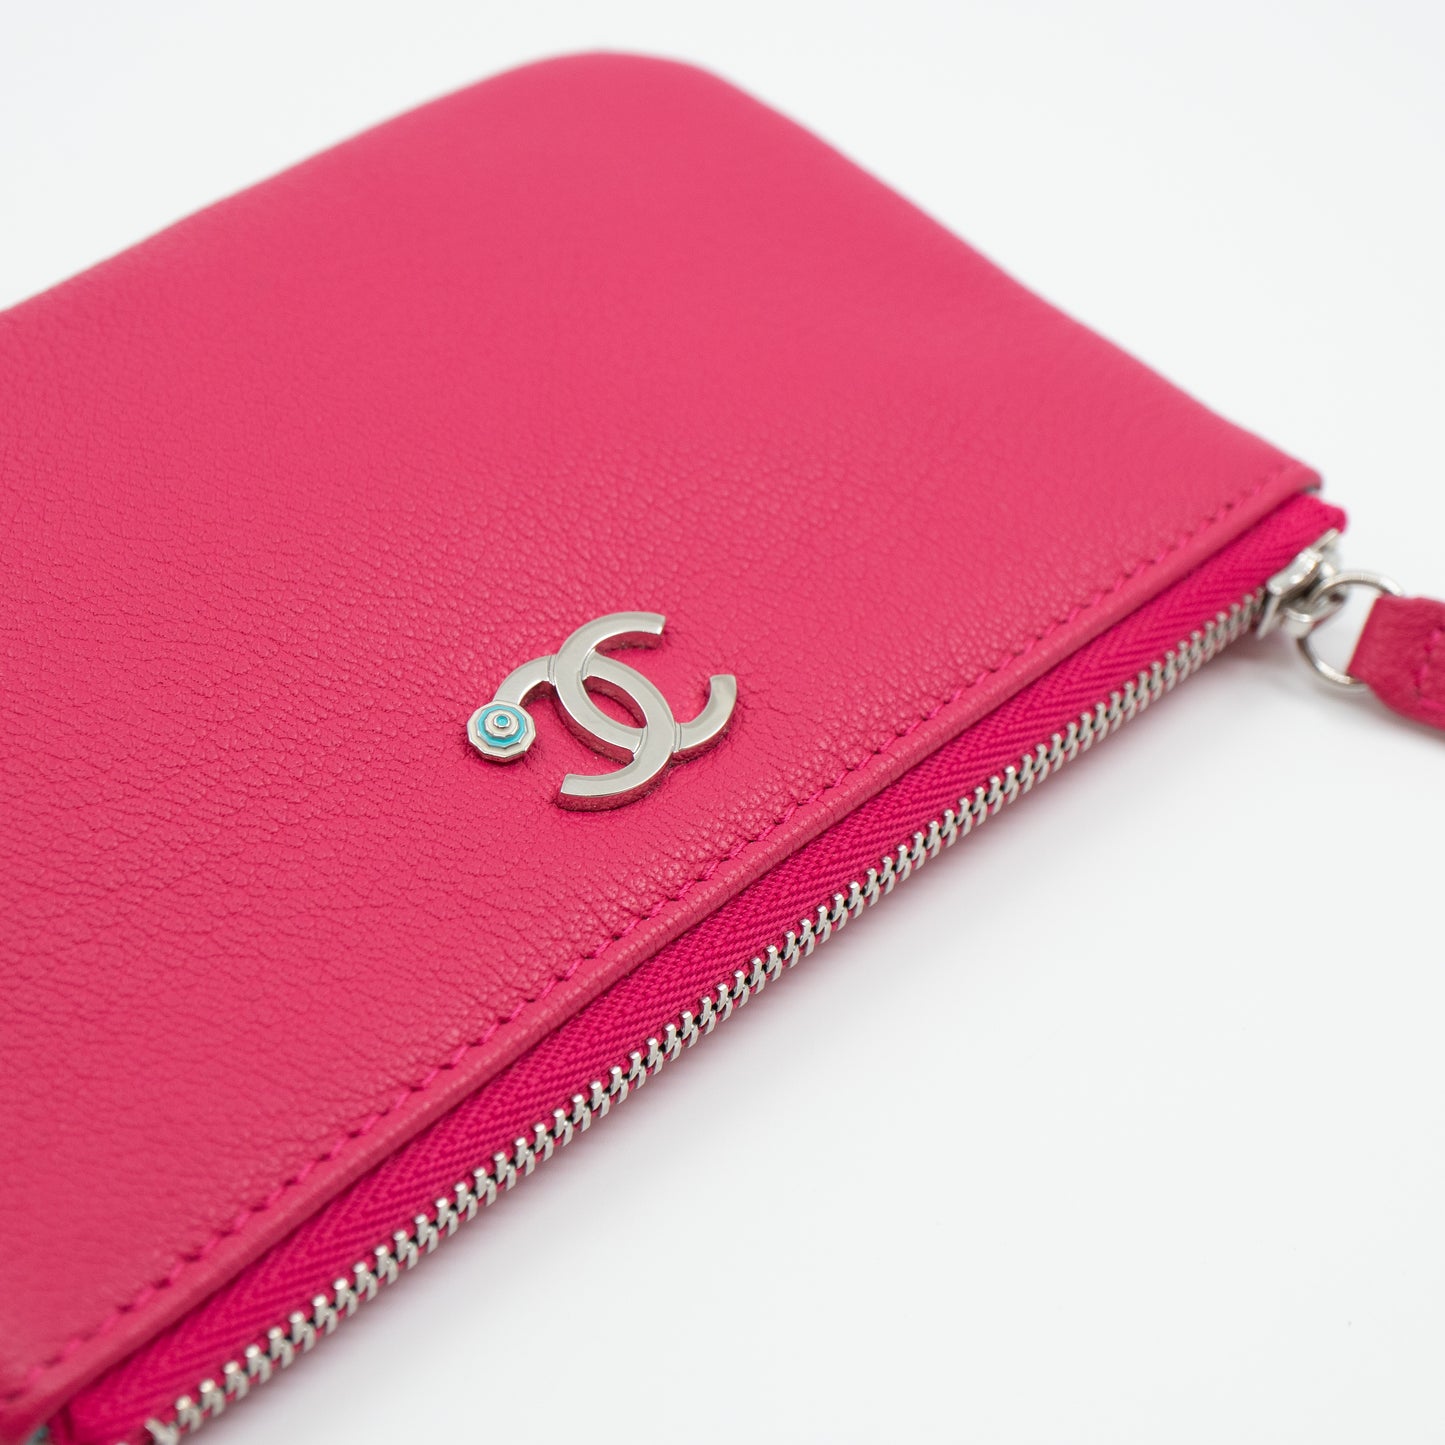 Classic Mini Pouch Pink Leather